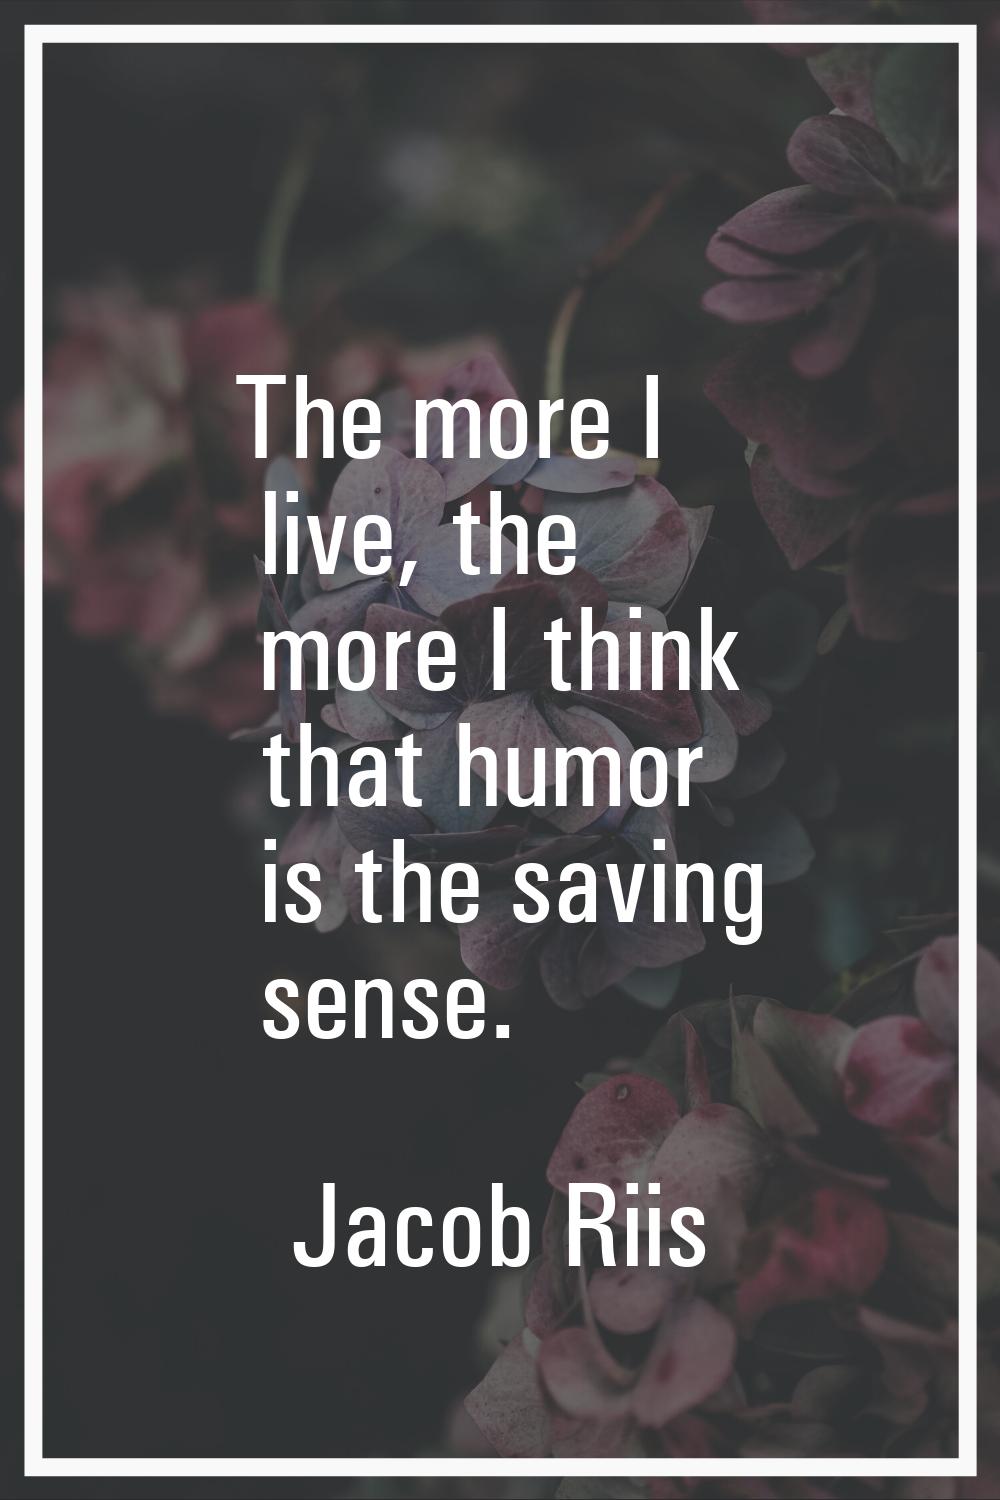 The more I live, the more I think that humor is the saving sense.